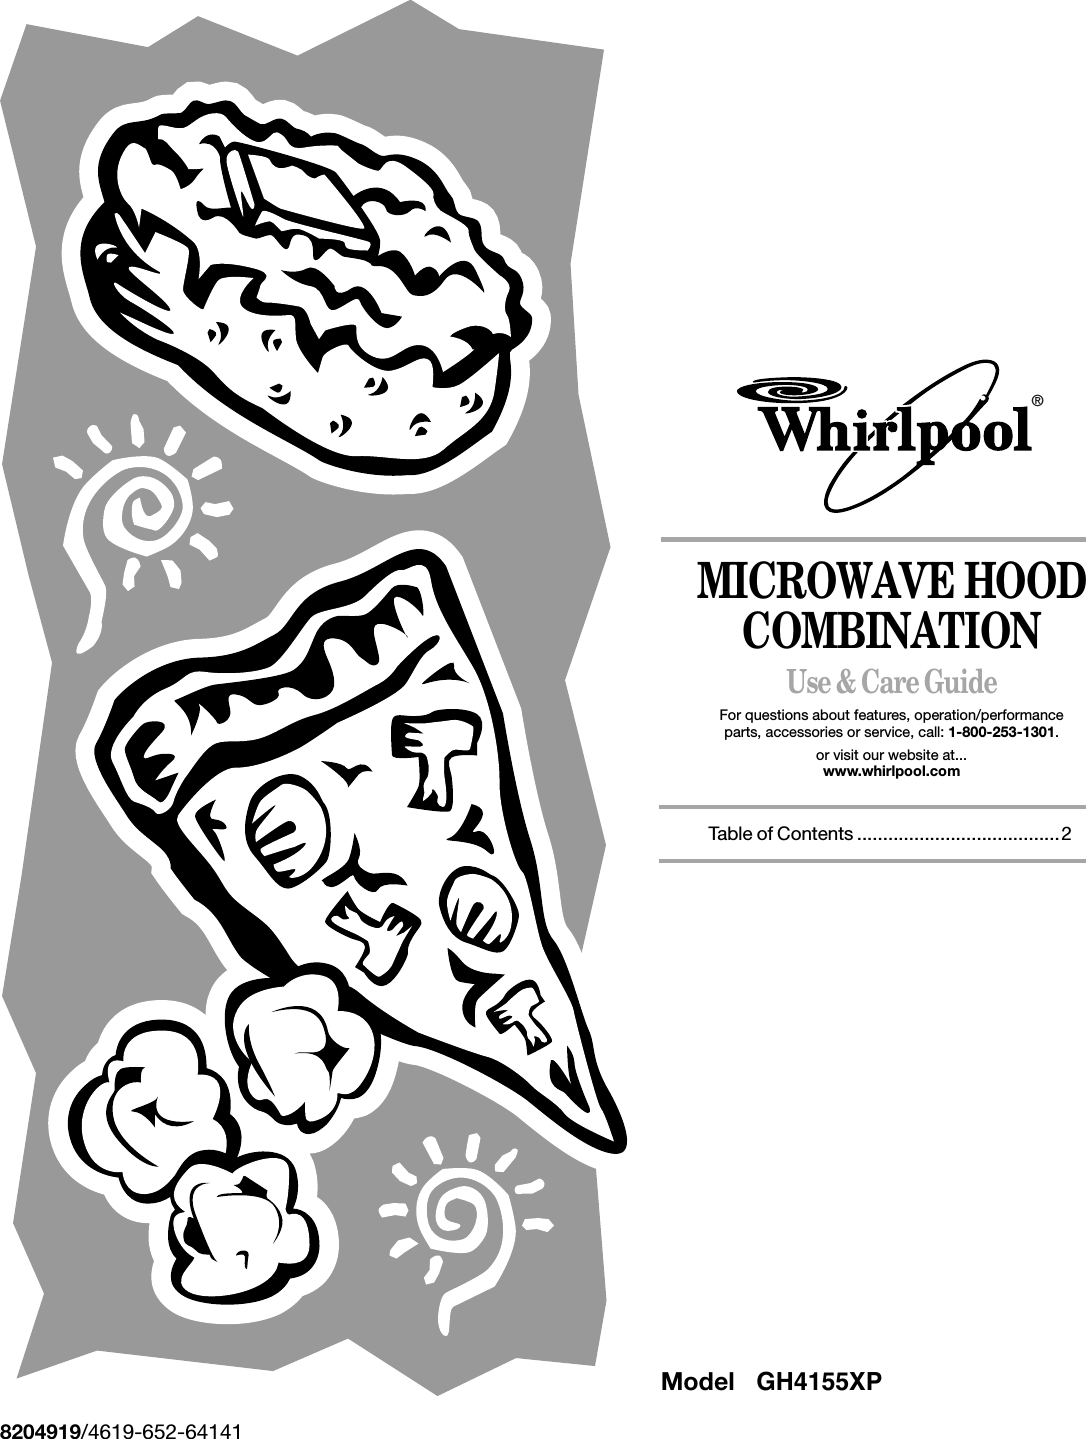 MICROWAVE HOOD COMBINATIONUse &amp; Care GuideFor questions about features, operation/performanceparts, accessories or service, call: 1-800-253-1301.or visit our website at...www.whirlpool.comTable of Contents .......................................28204919/4619-652-64141®Model  GH4155XP